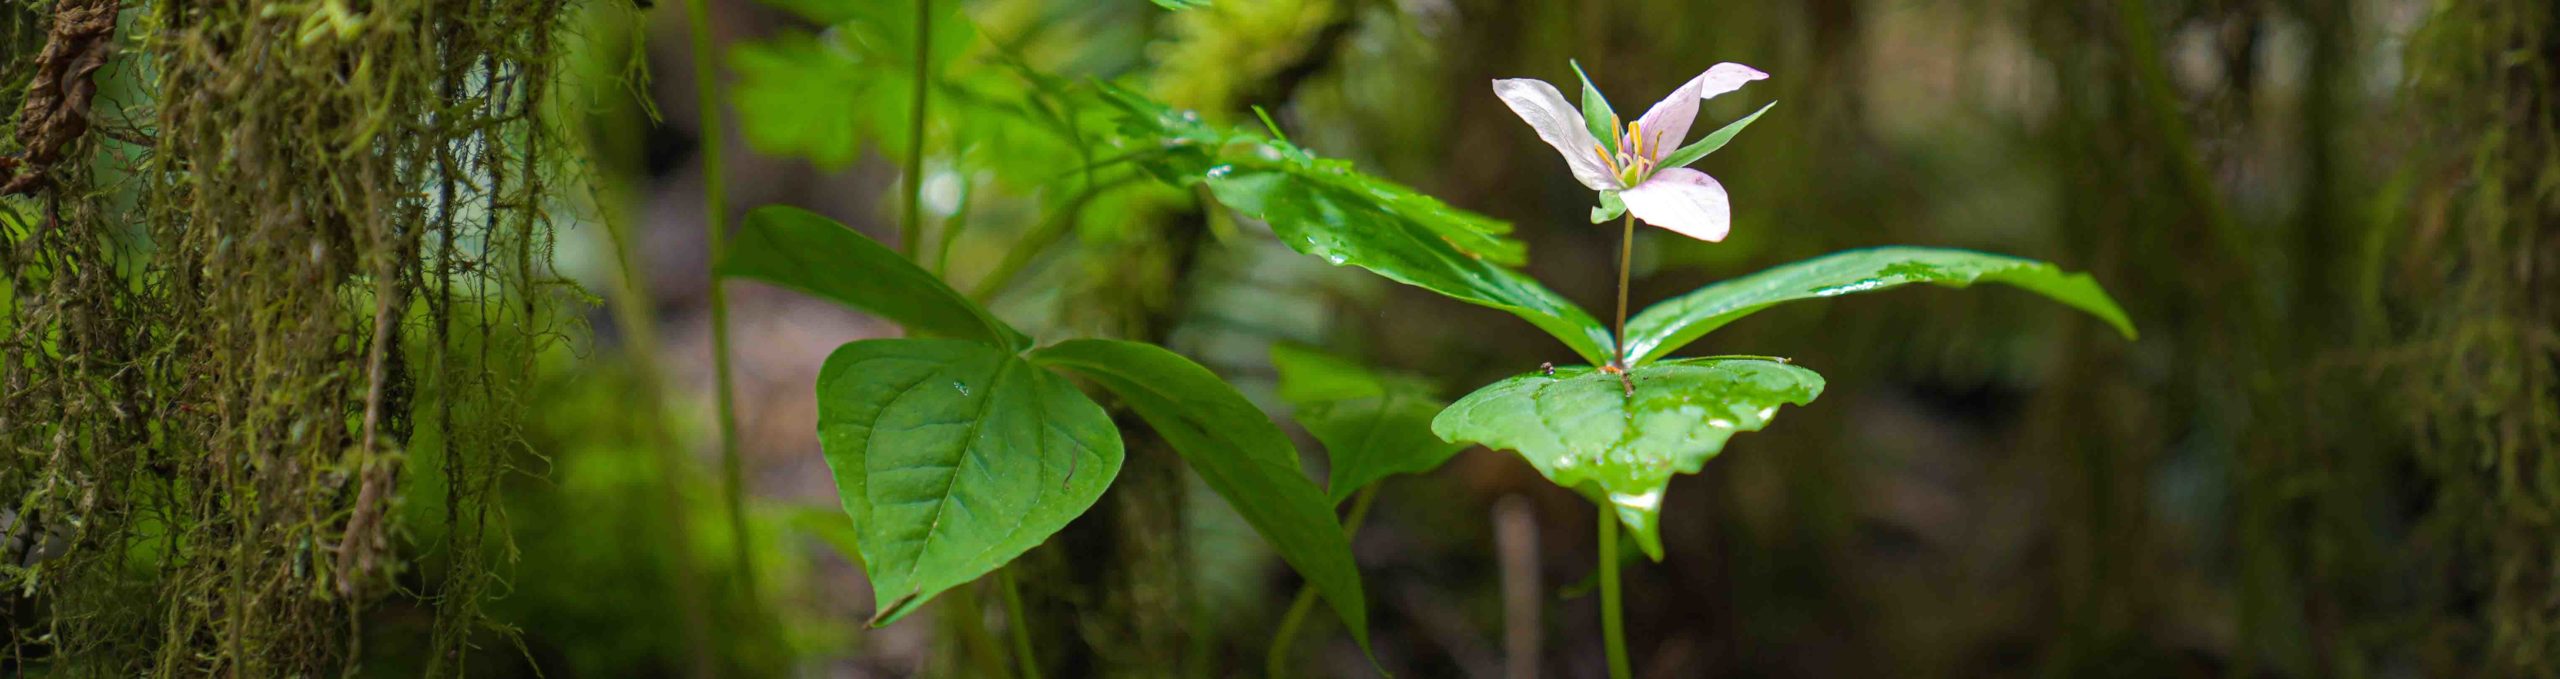 A trillium flower in the forest